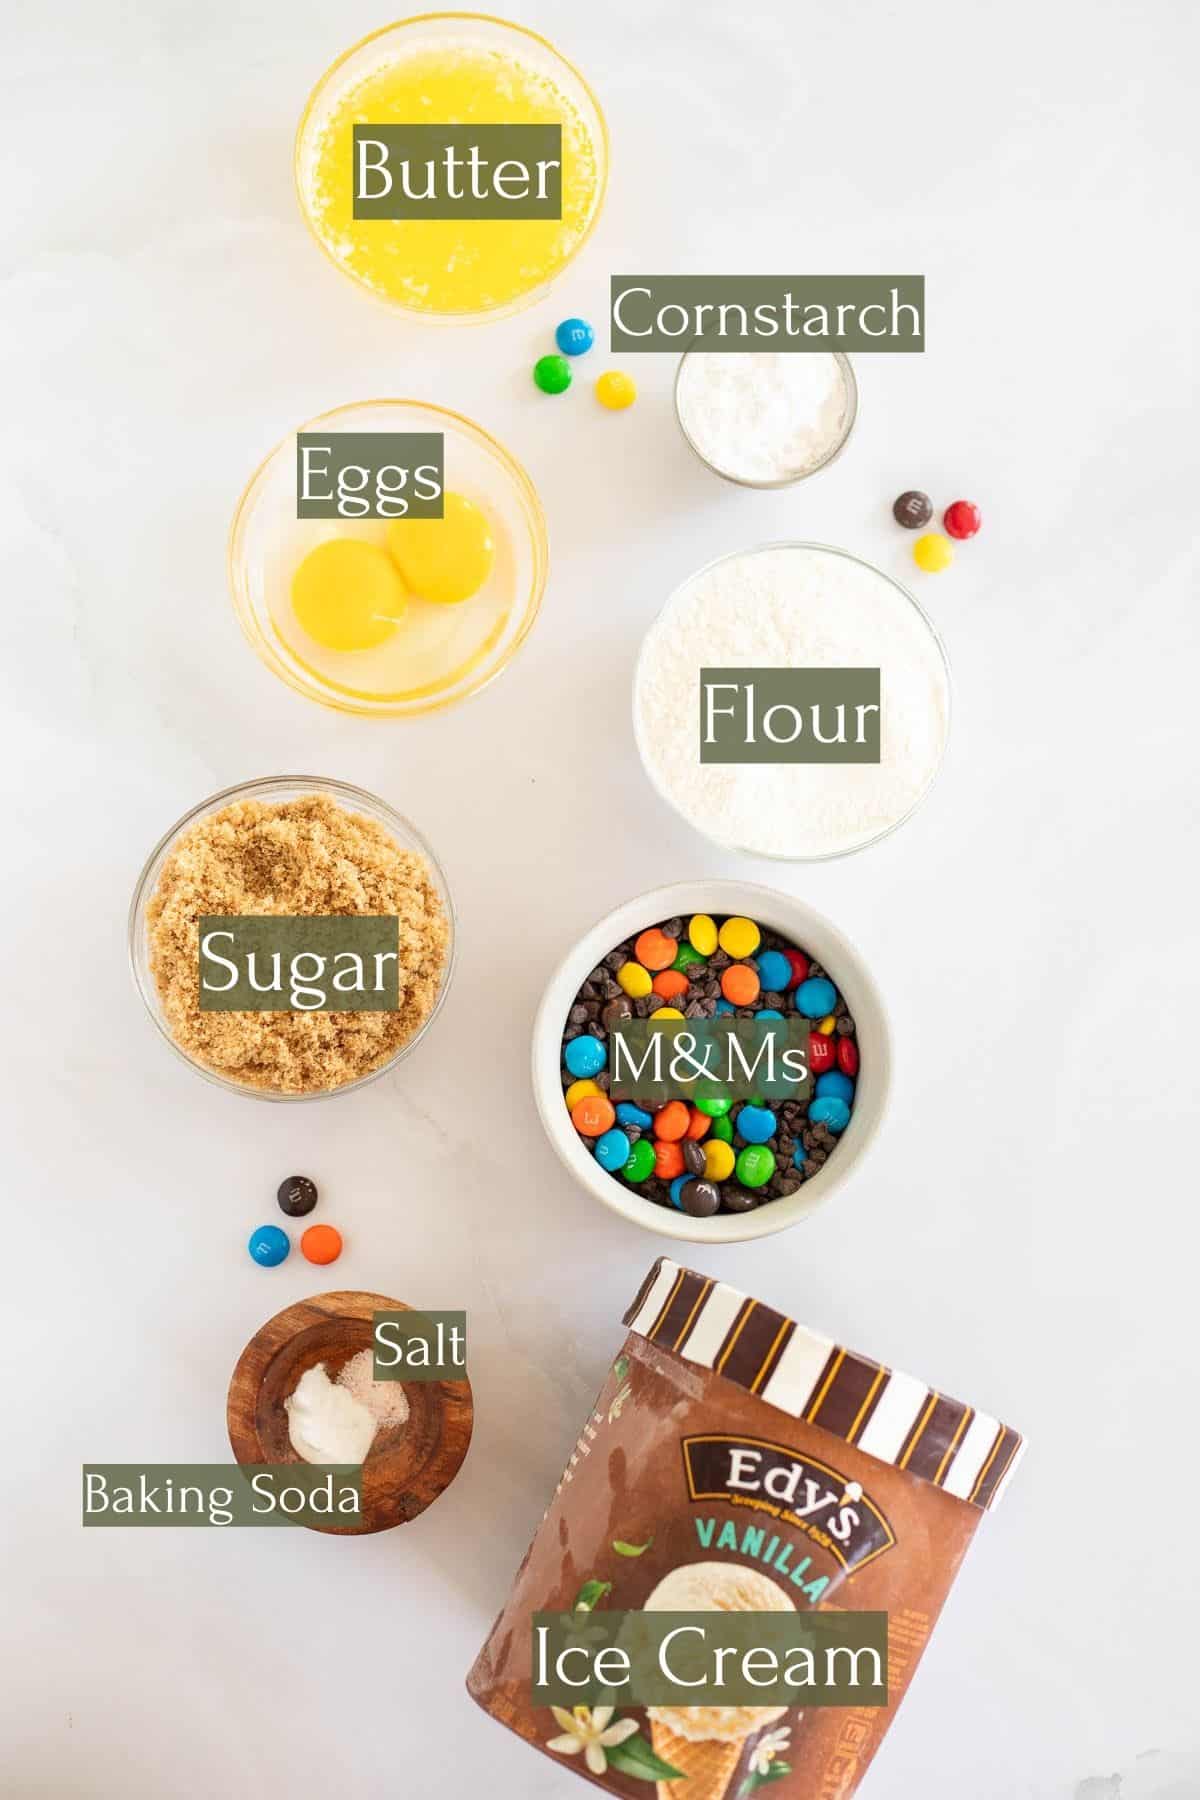 ingredients to make M&M ice cream sandwiches labeled with green text boxes.